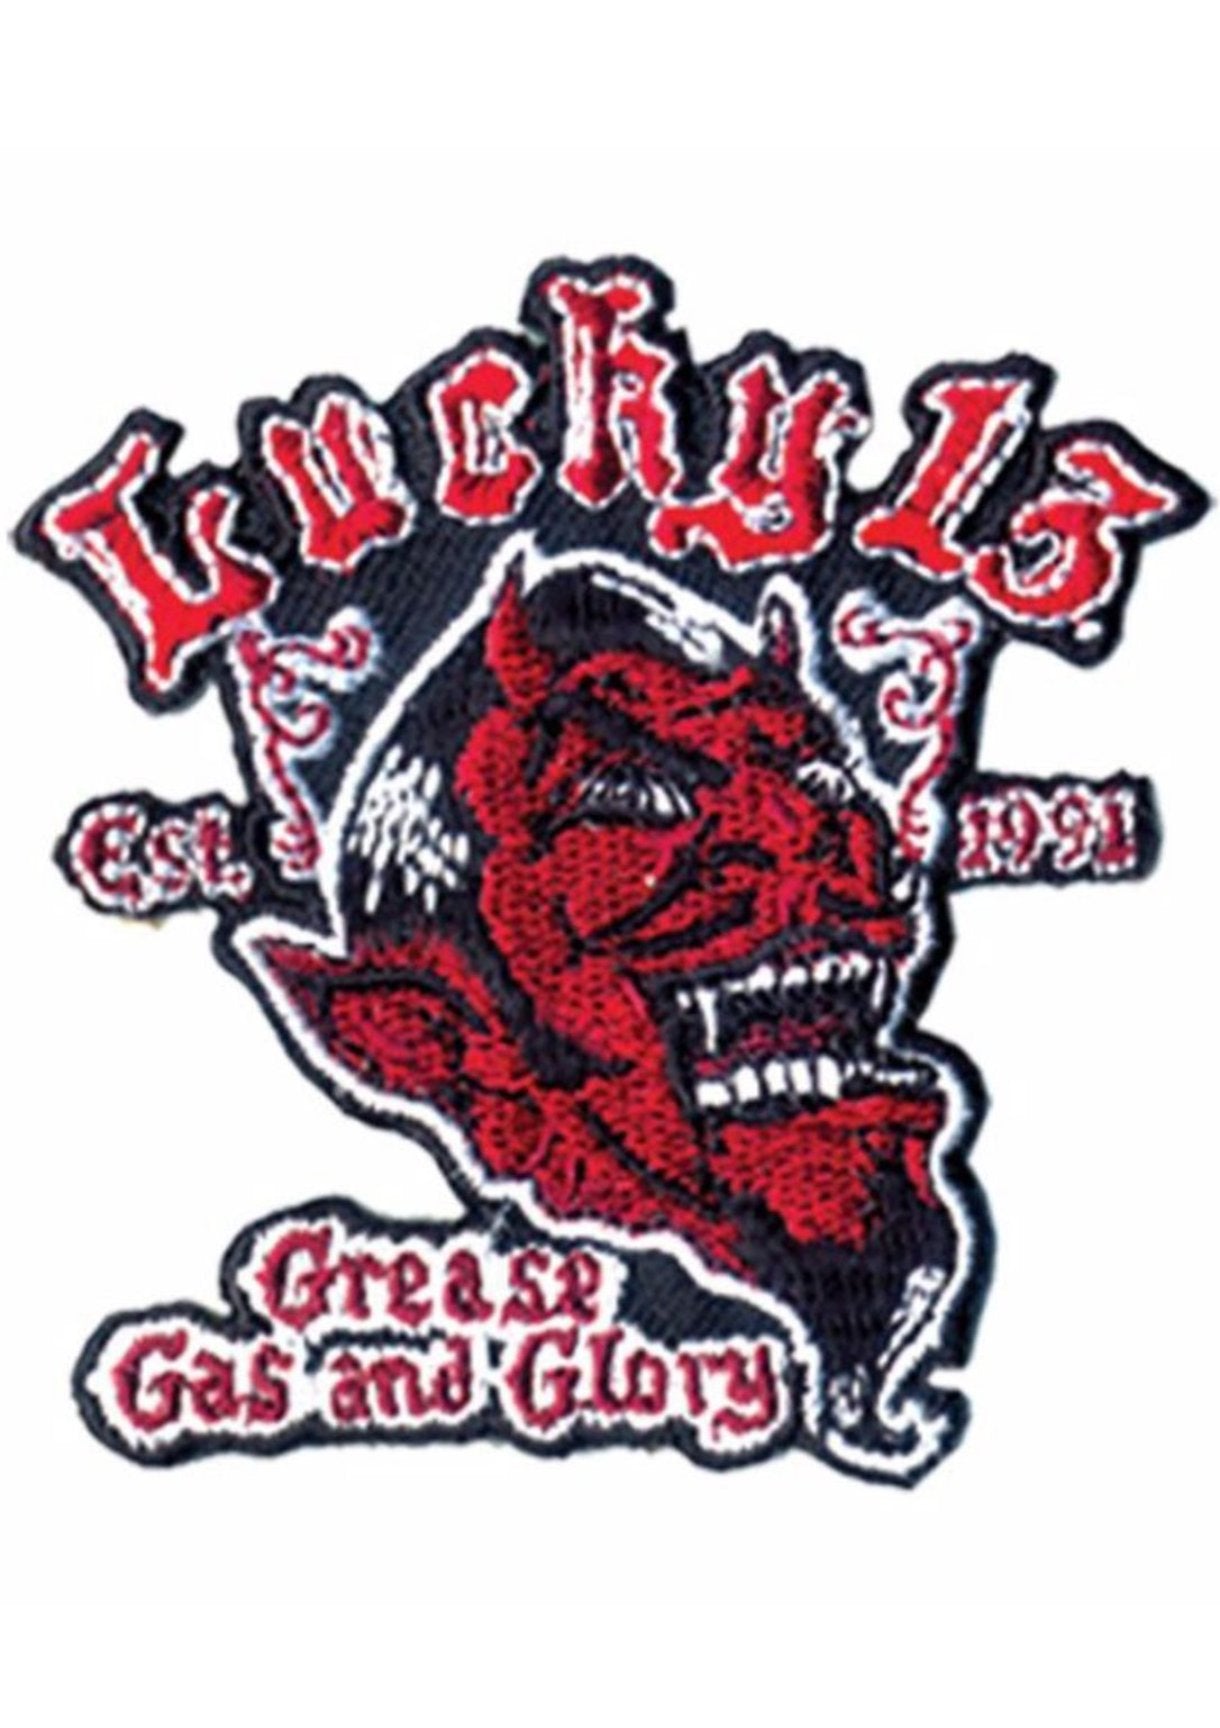 The GREASE GAS & GLORY Patch